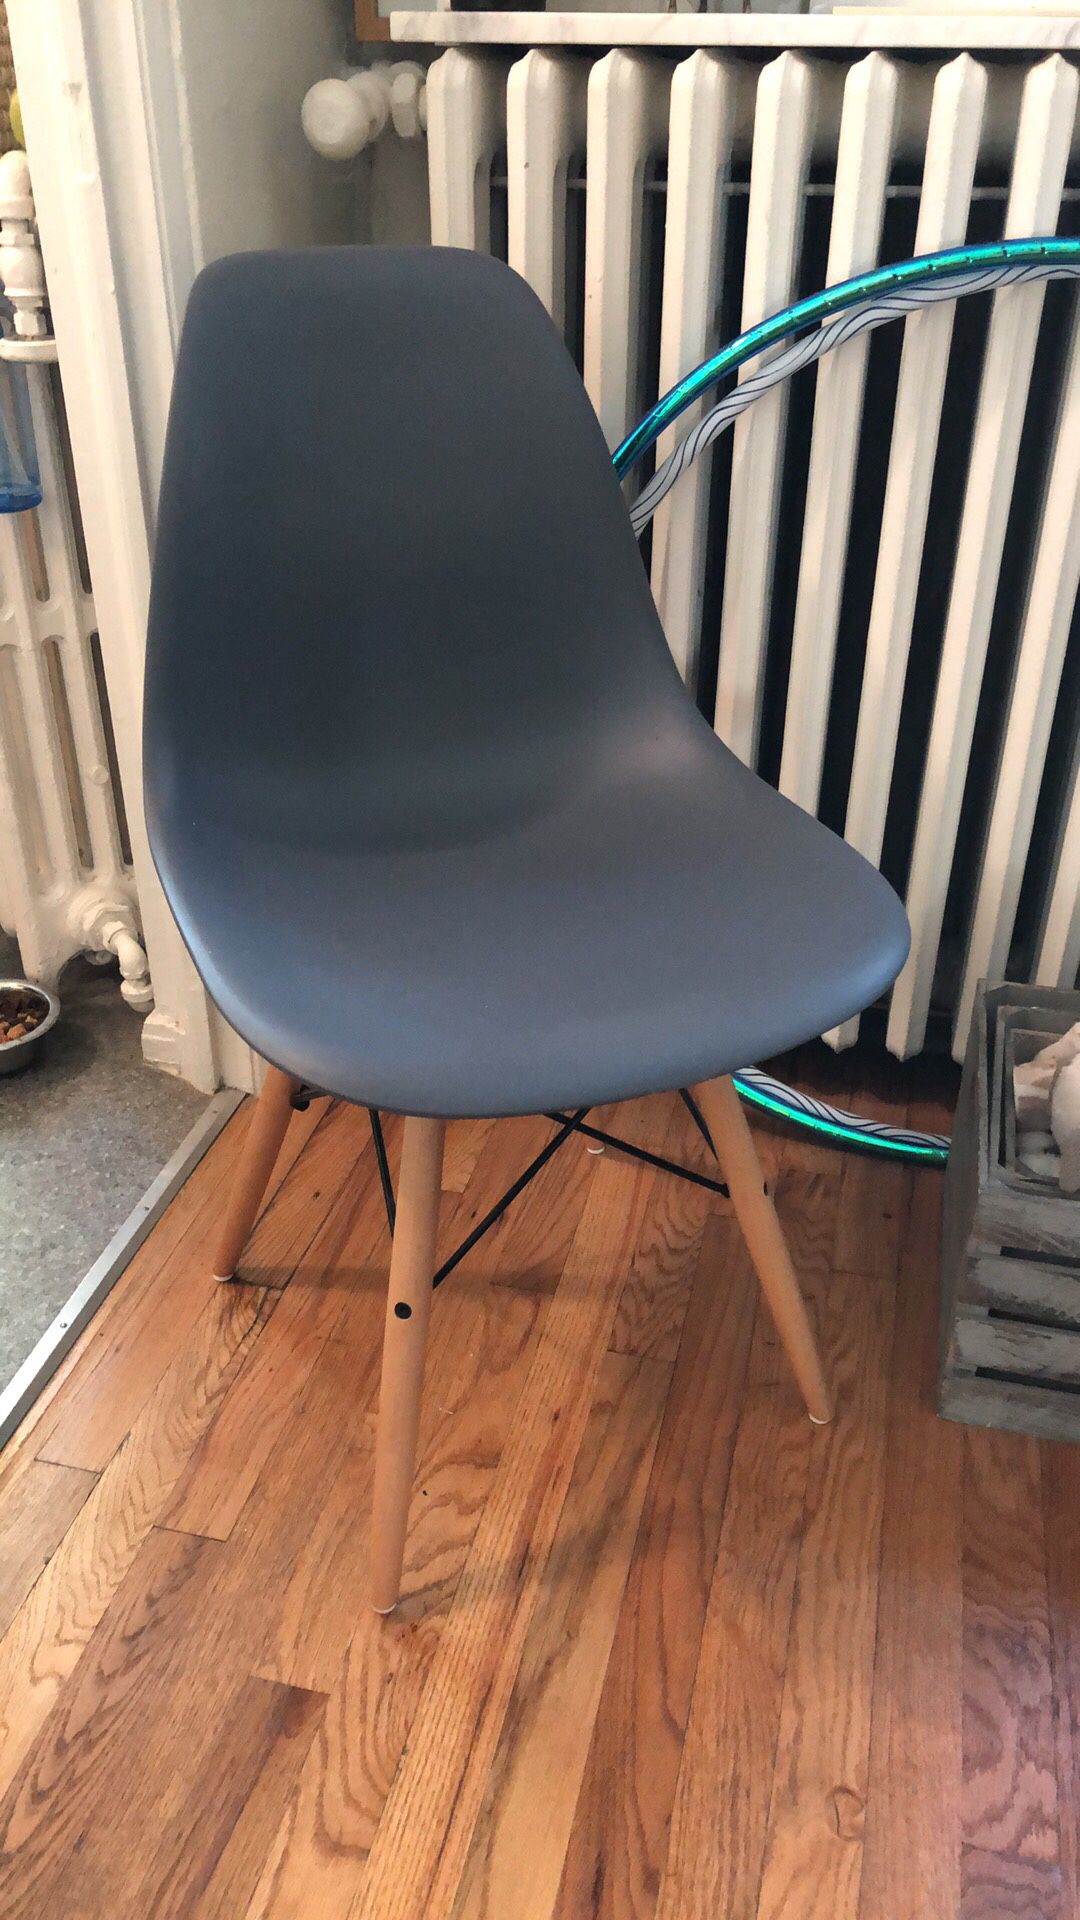 Two kitchen table chairs